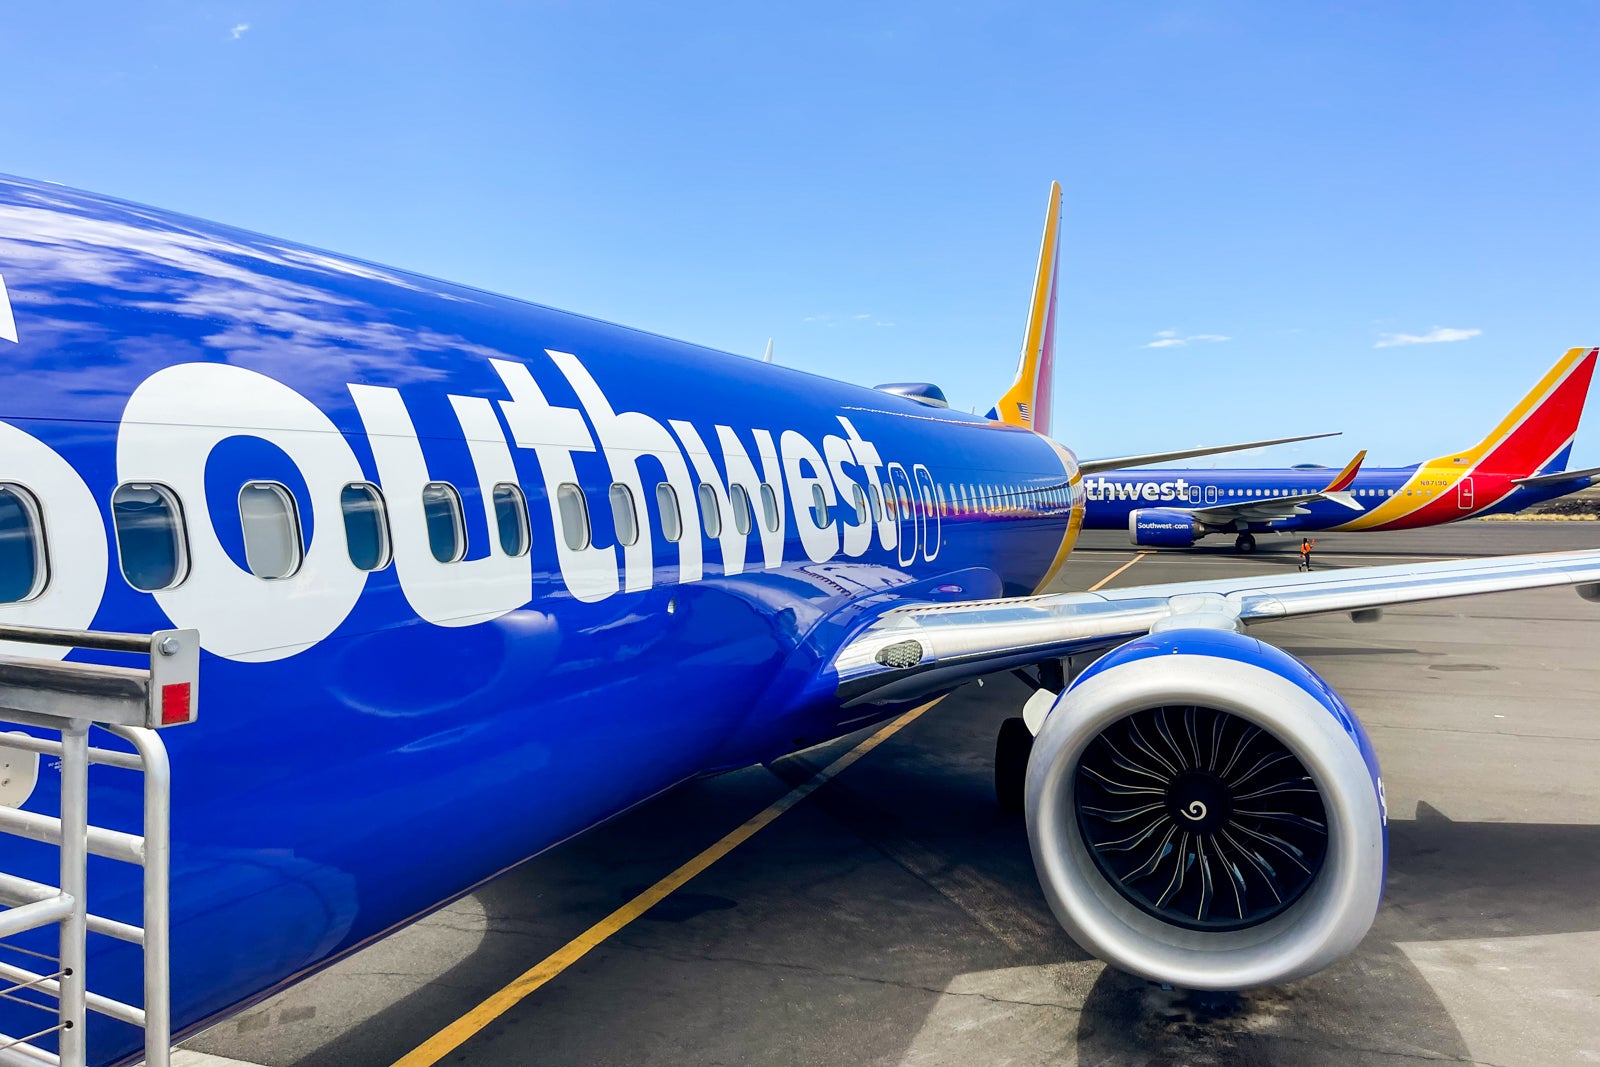 Southwest of the Boeing 737 MAX 8